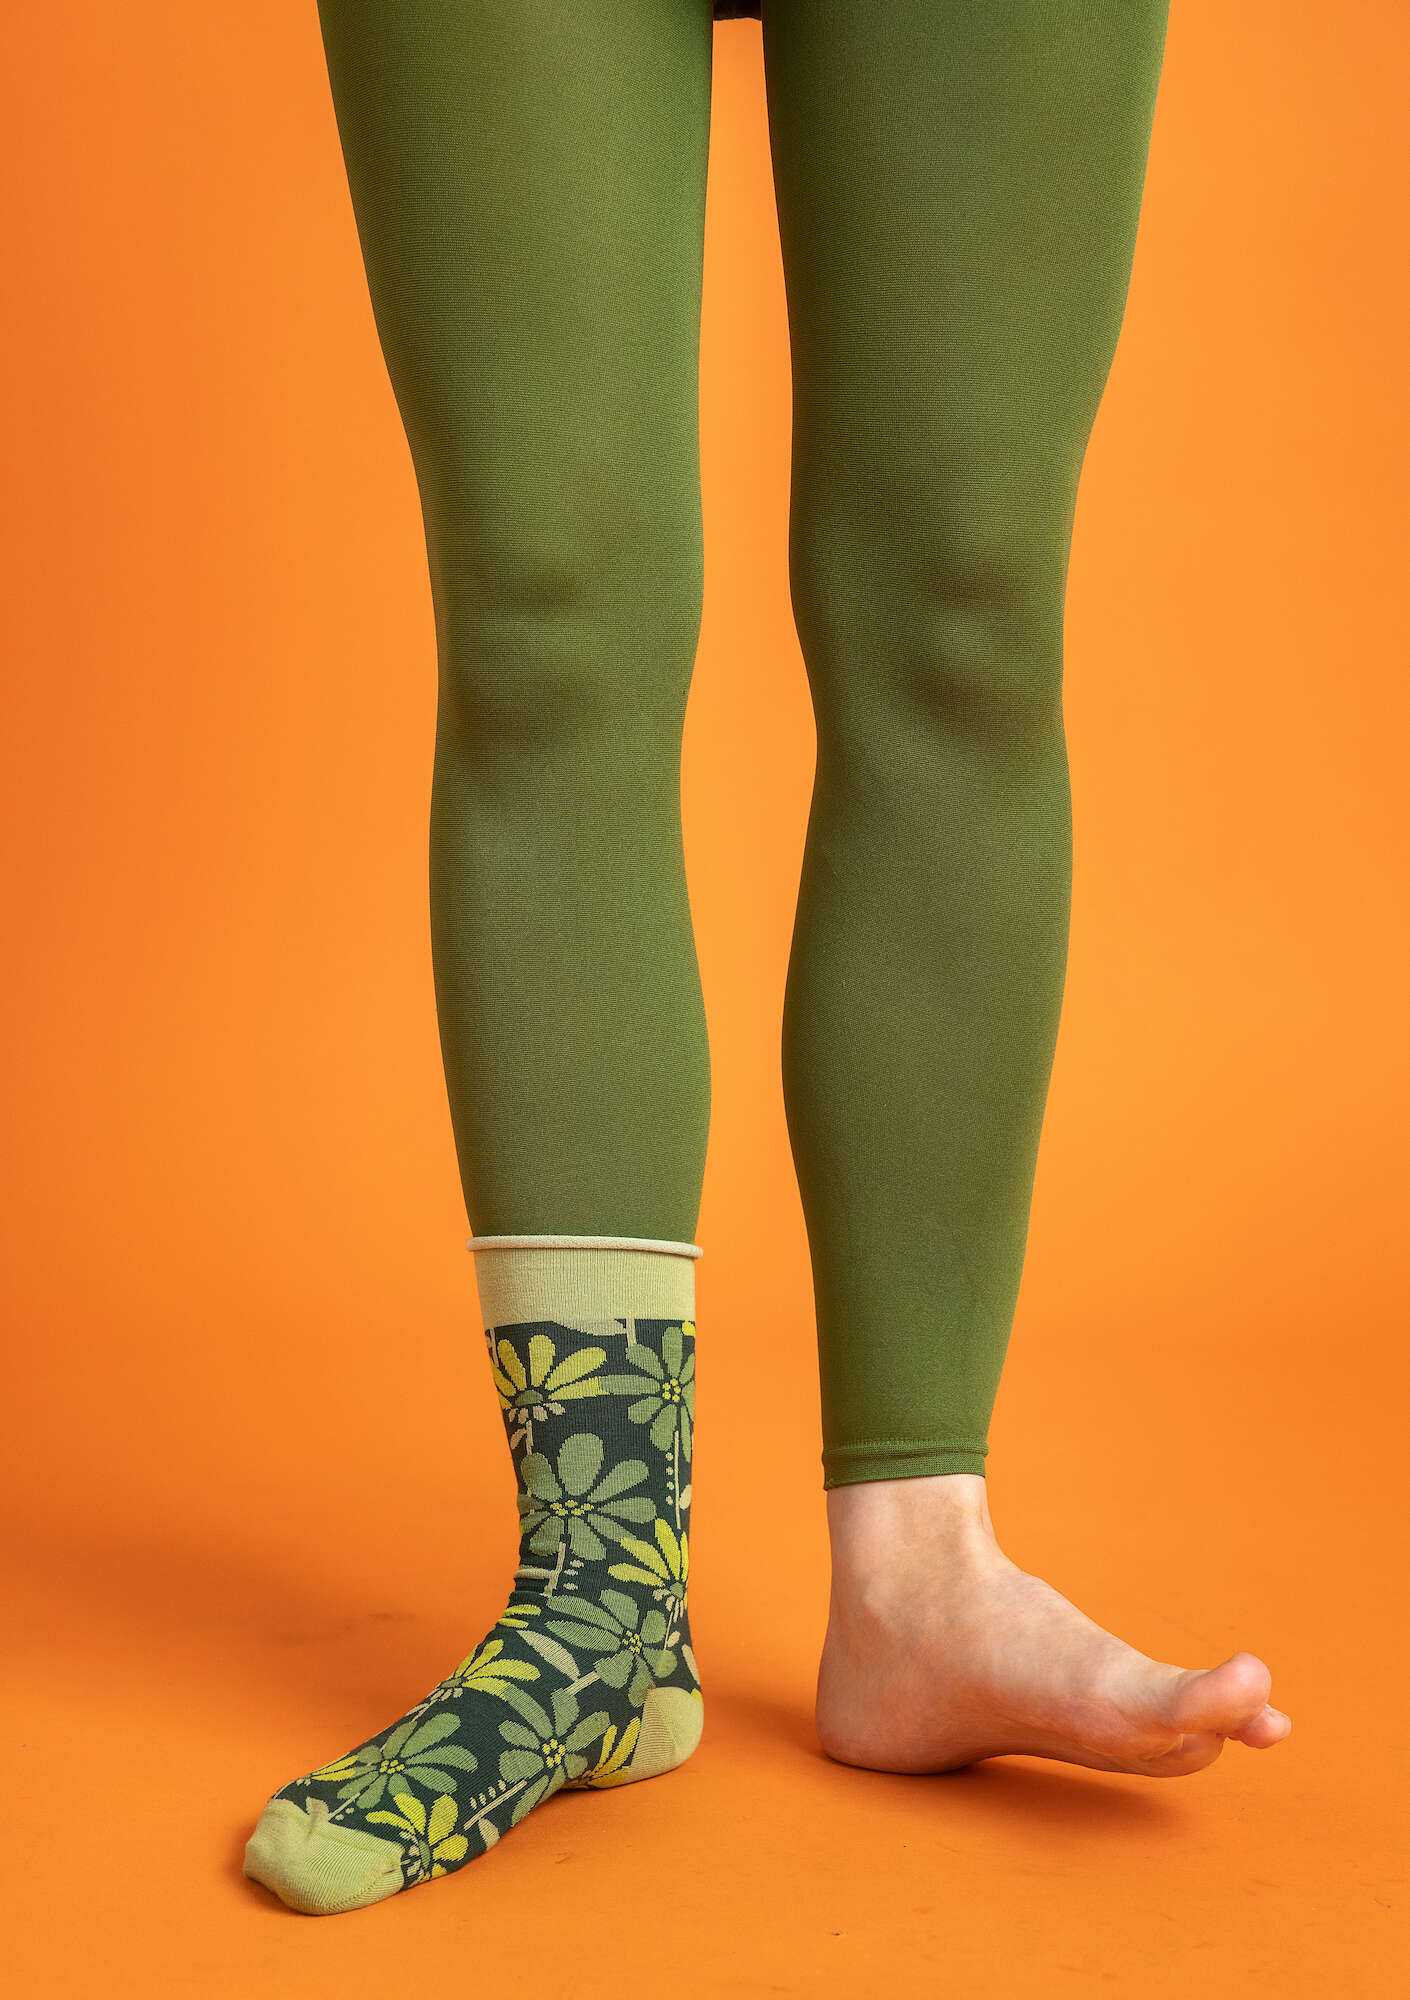 Solid-colored leggings in recycled nylon grass green